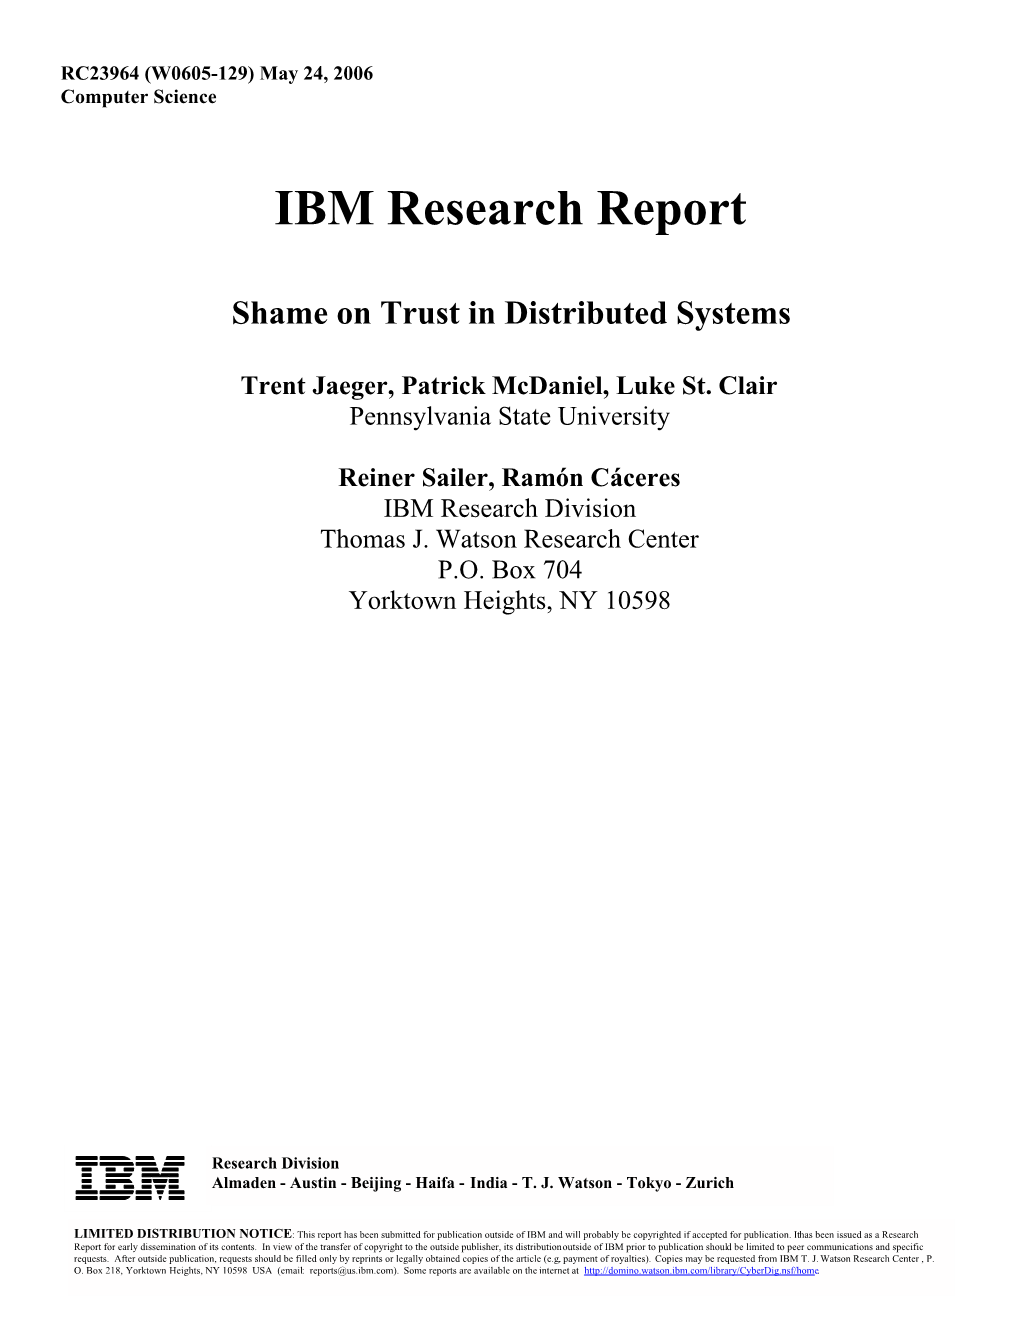 IBM Research Report Shame on Trust in Distributed Systems Trent Jaeger